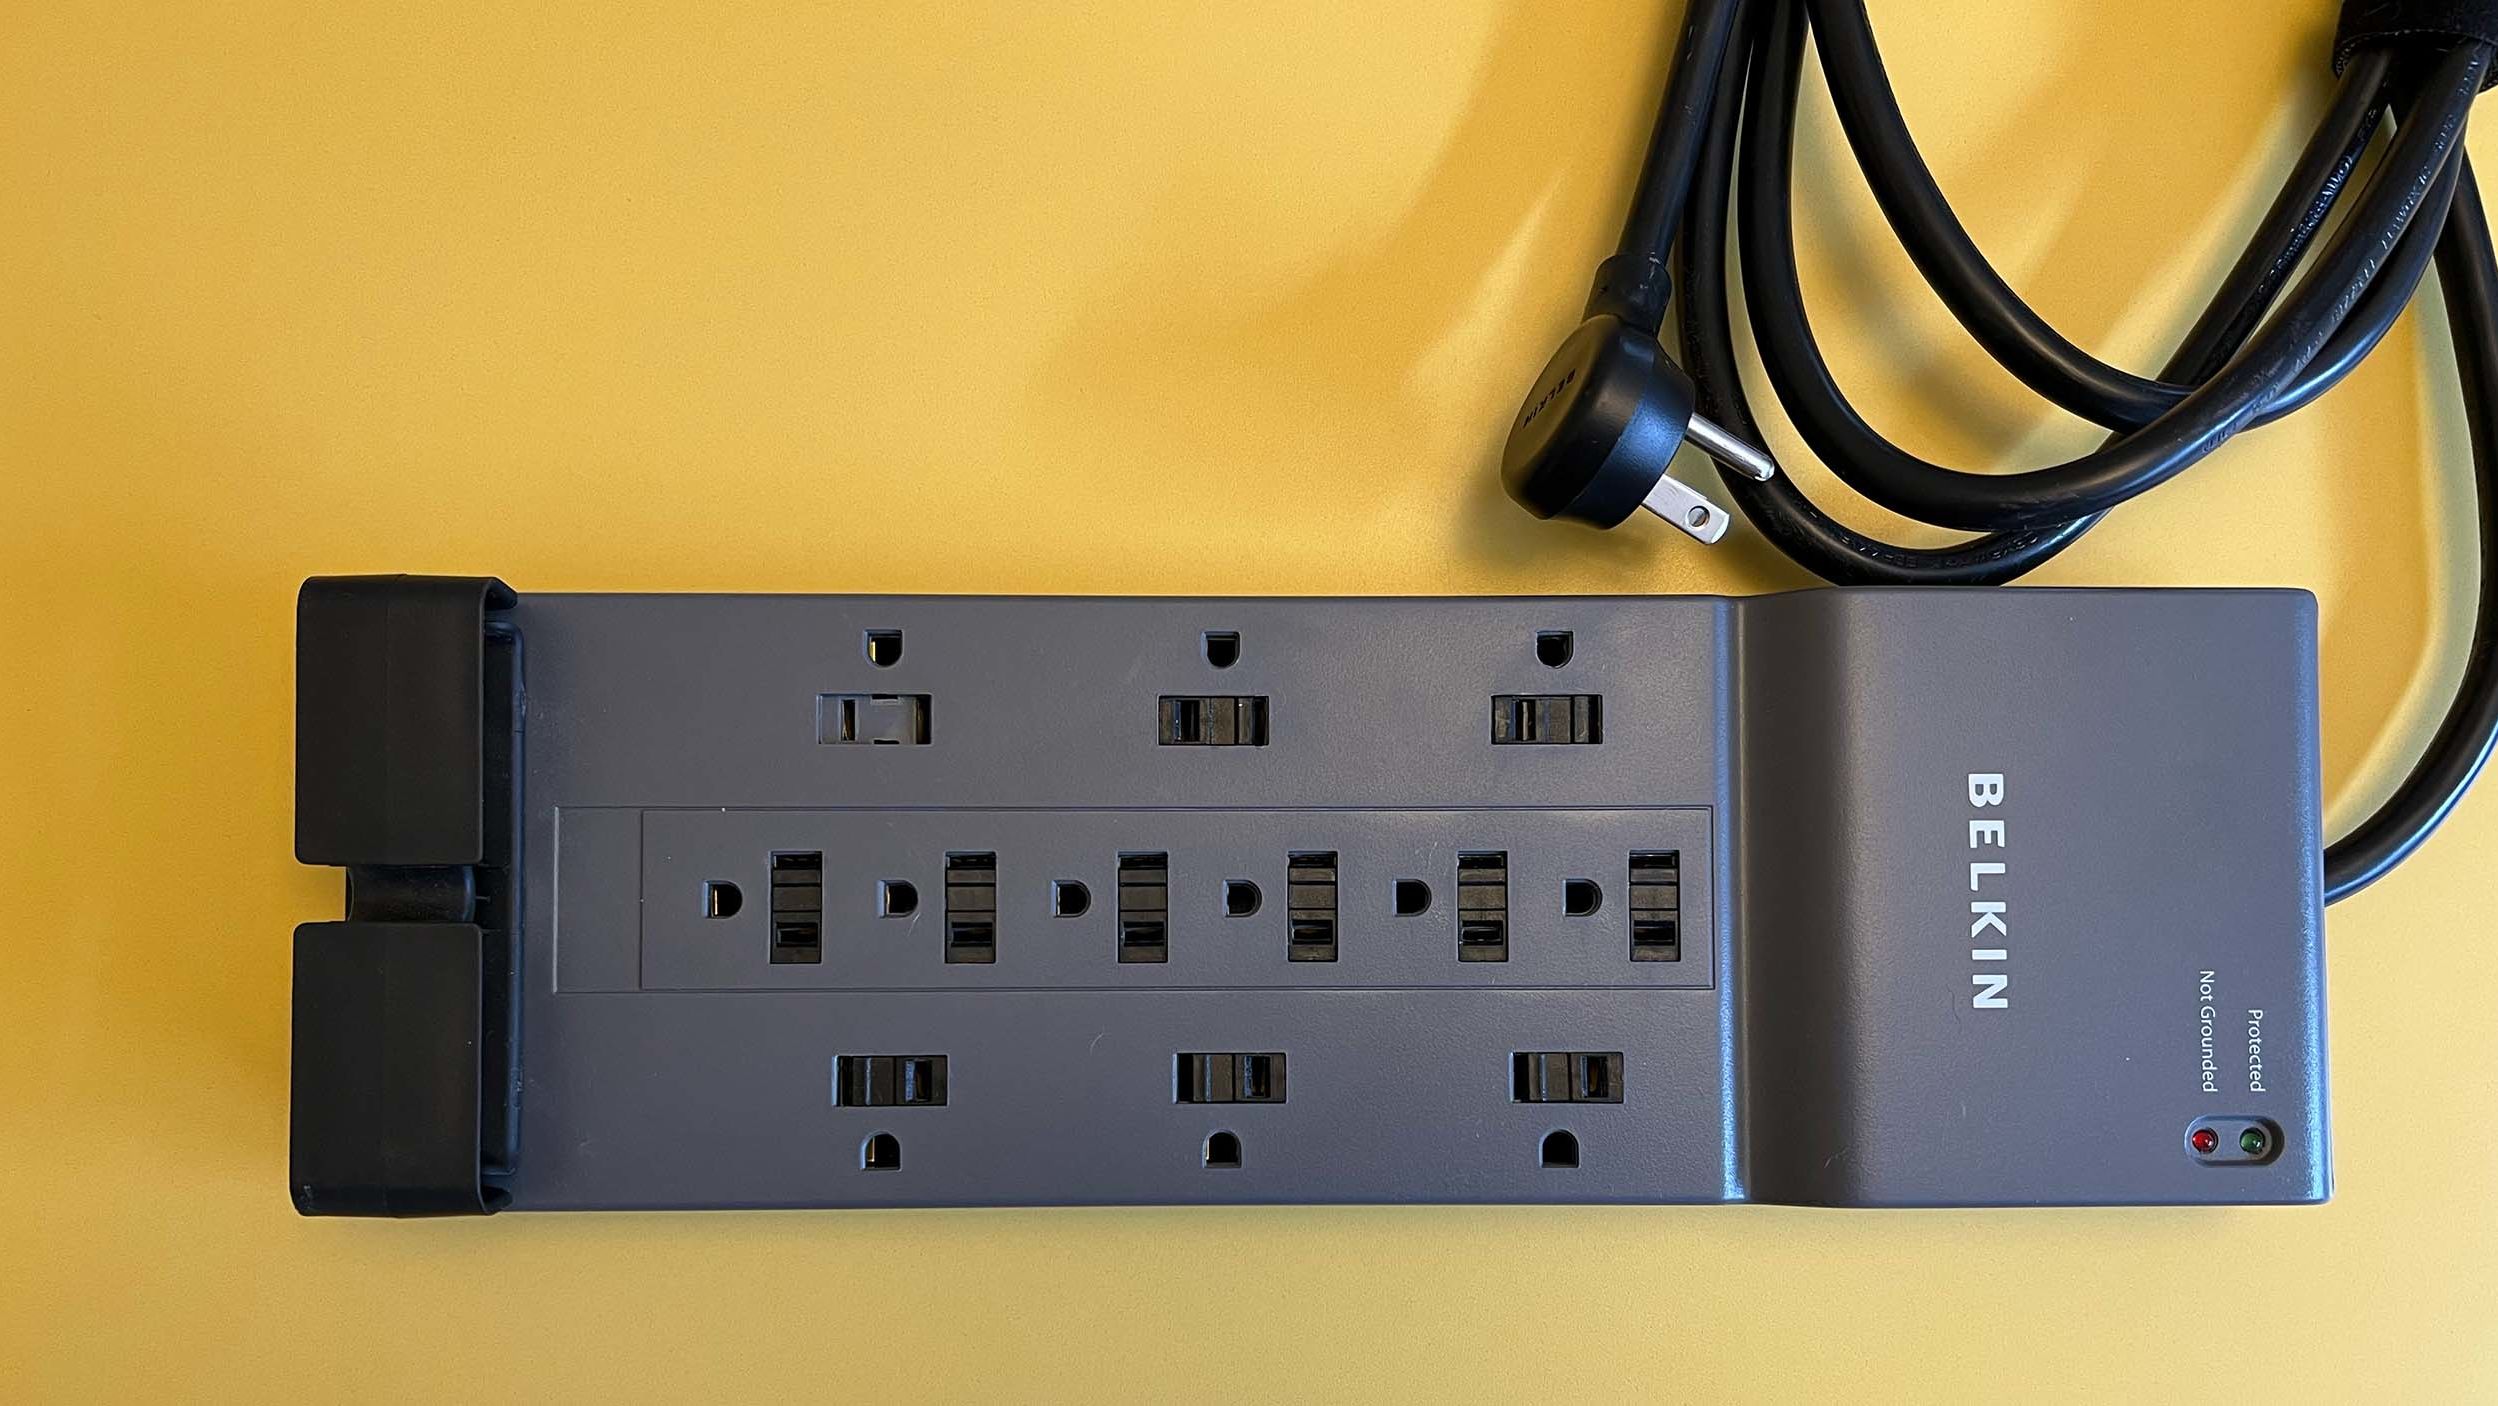 GE 6-Outlet Grounded Power Strip with 12 ft. Long Extension Cord